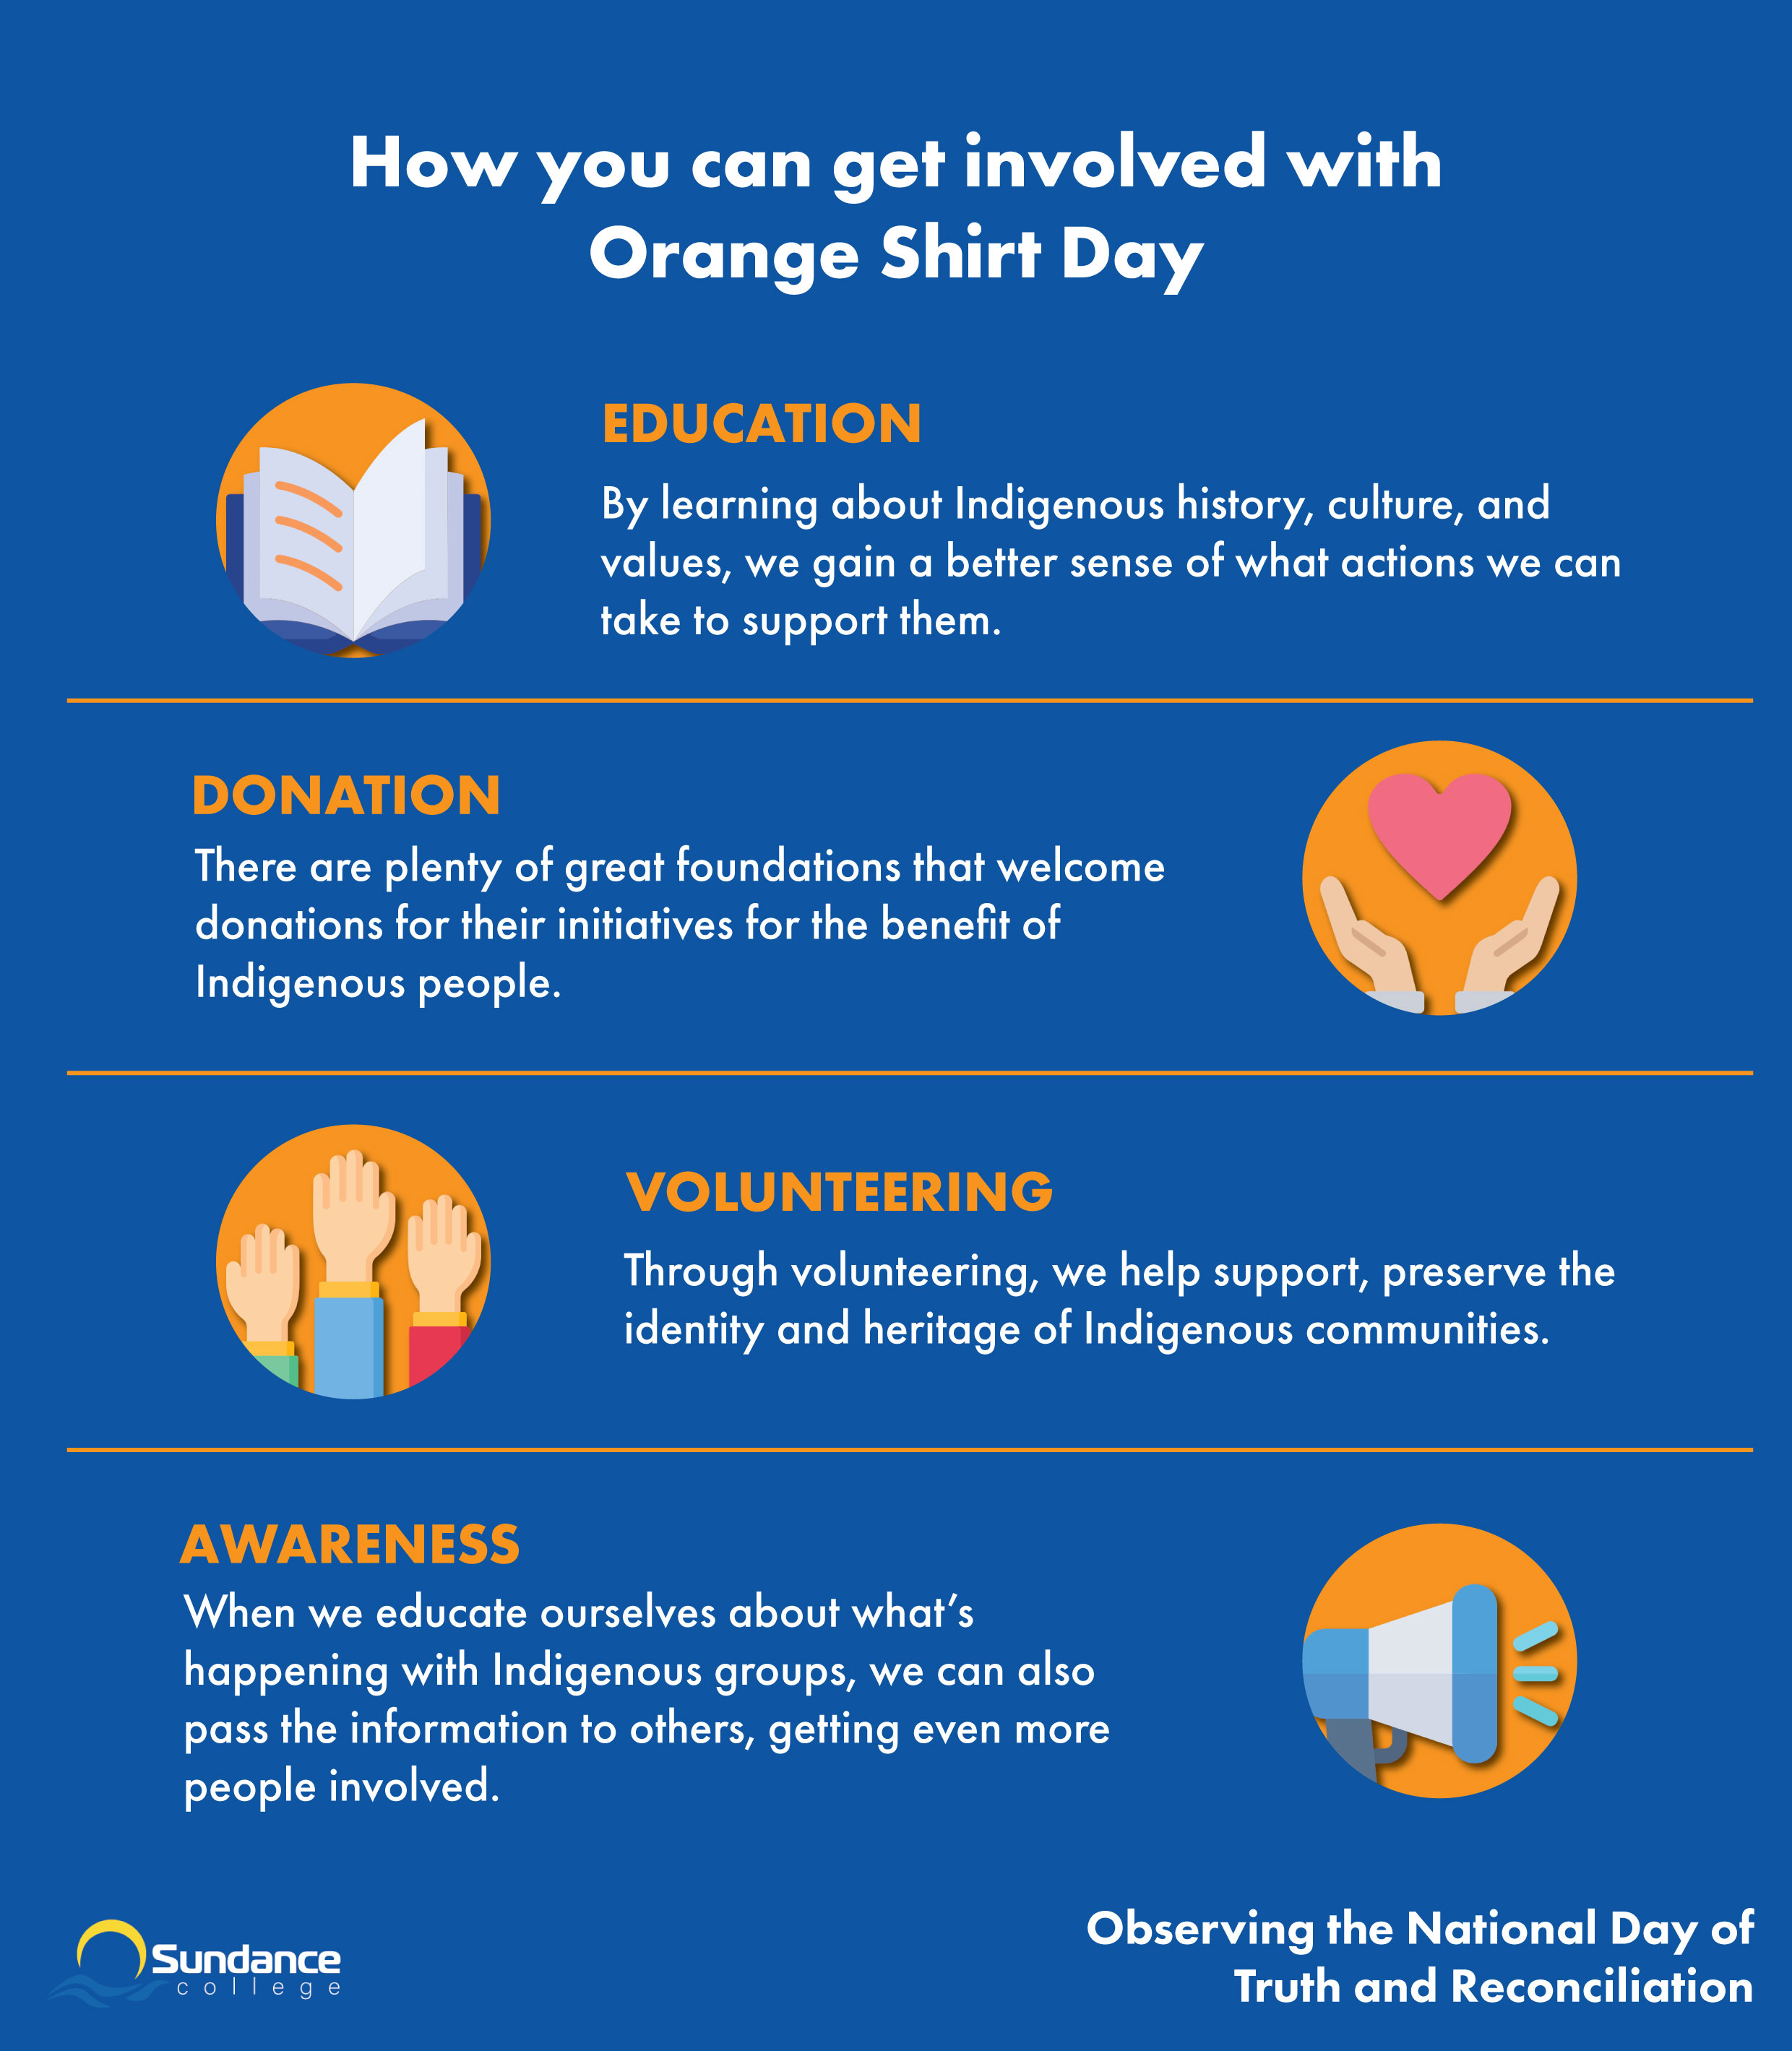 Ways to get involved with Orange Shirt Day